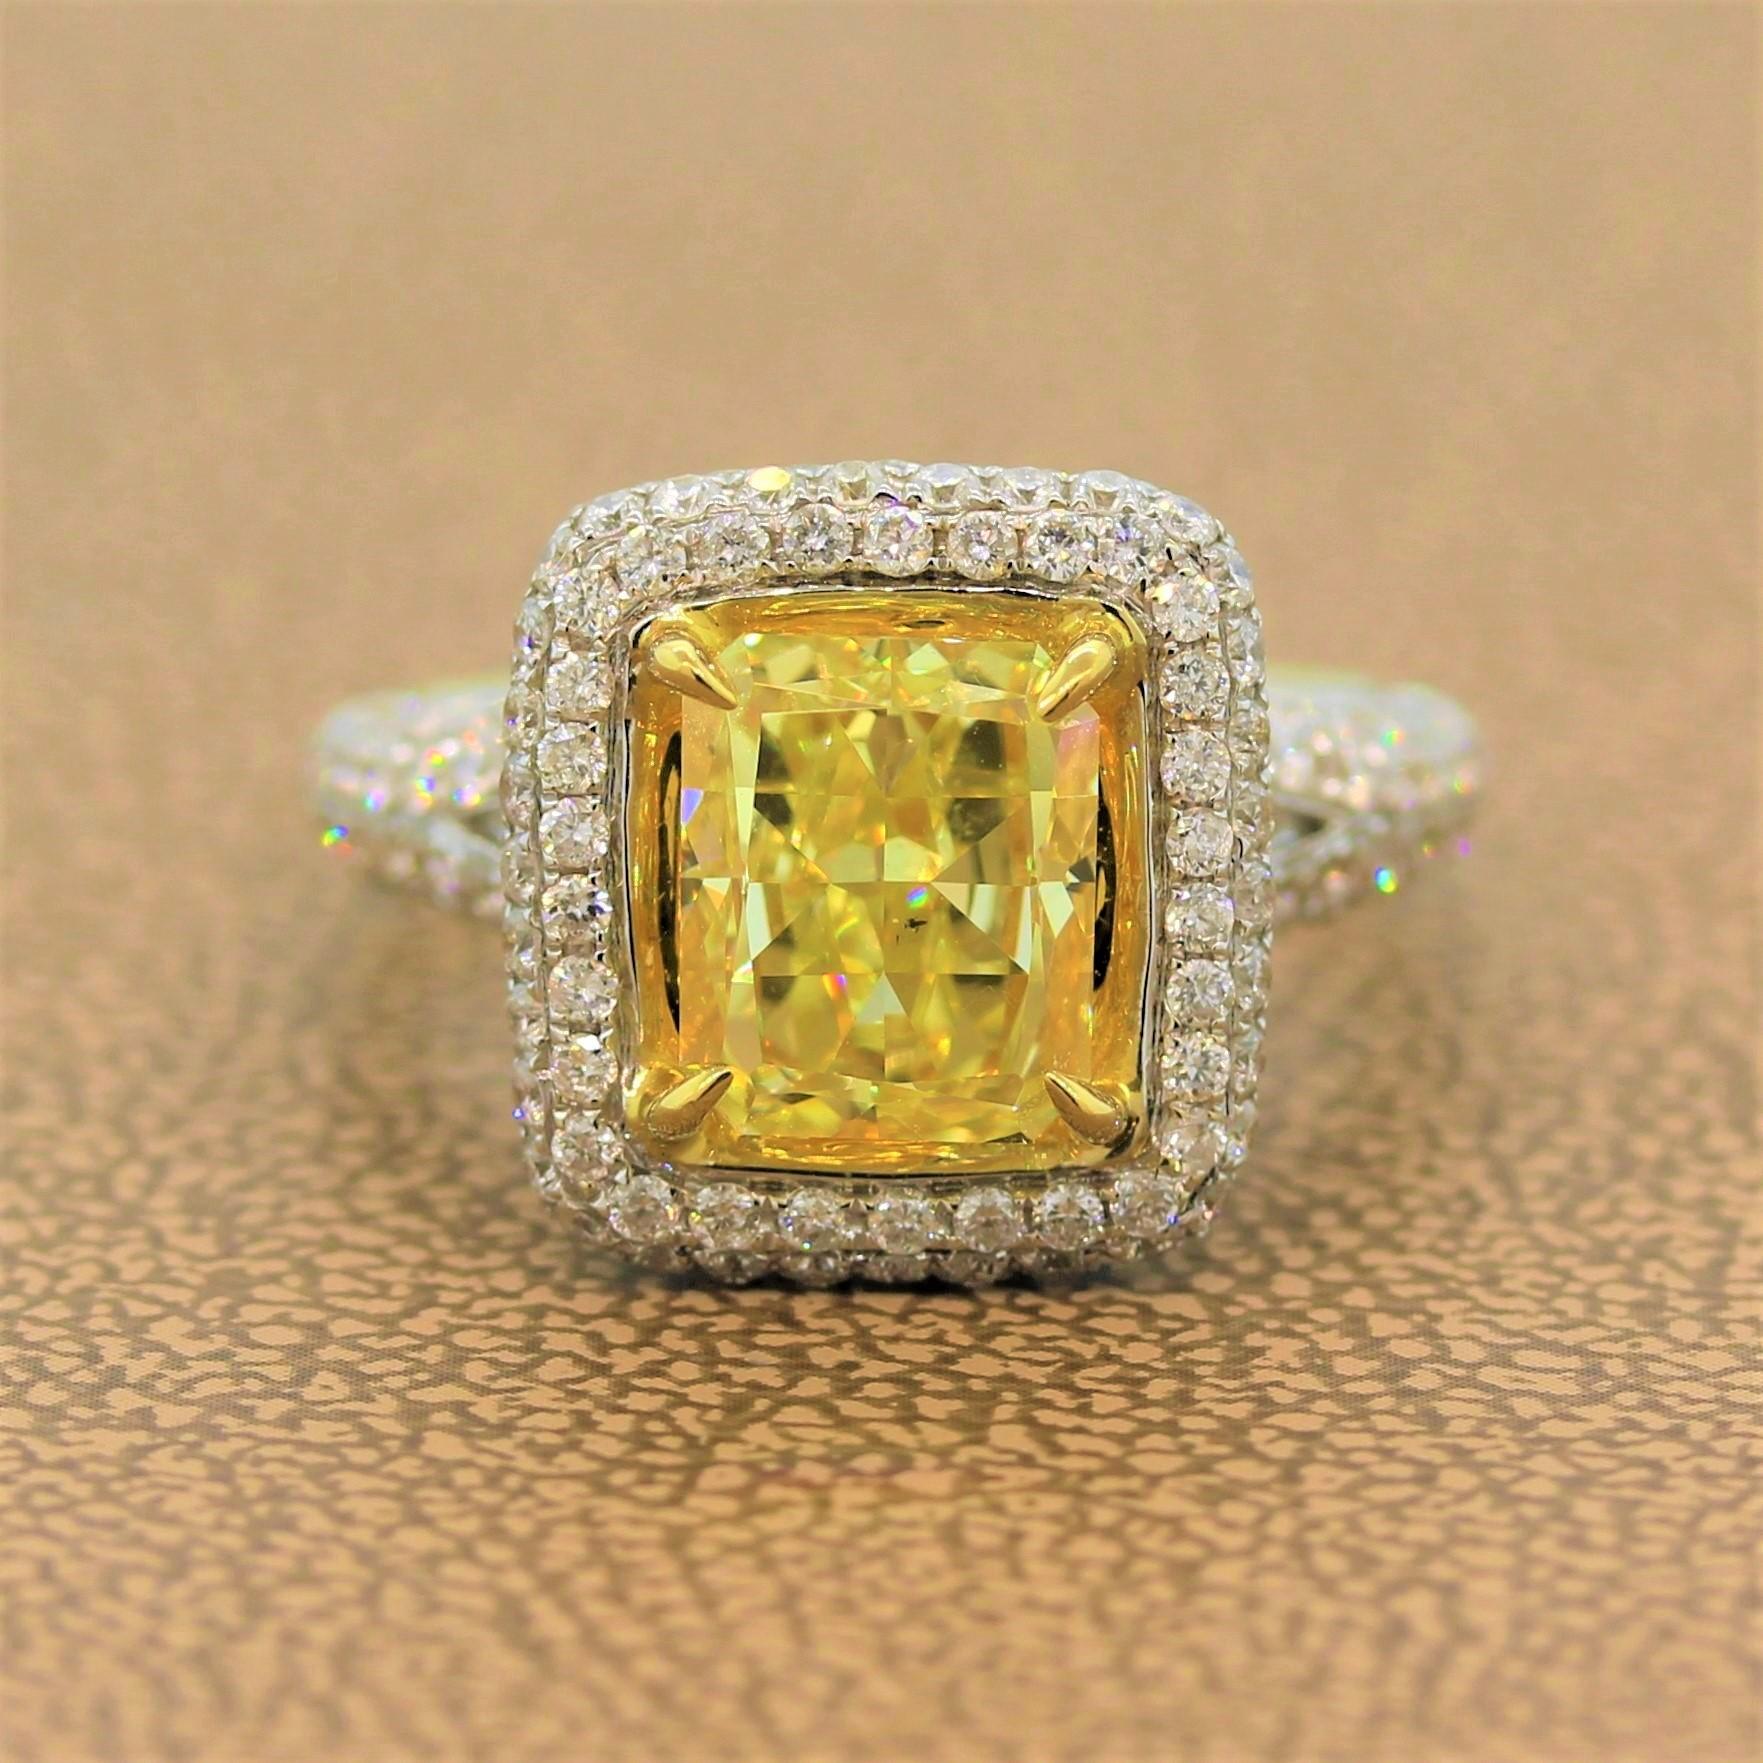 A vibrant ring featuring a 3.03 carat fancy intense yellow diamond in an 18K yellow gold setting. The cushion cut diamond is haloed by 1.52 carats of colorless diamonds. The pave set diamonds go along the split shank of this 18K white gold ring as